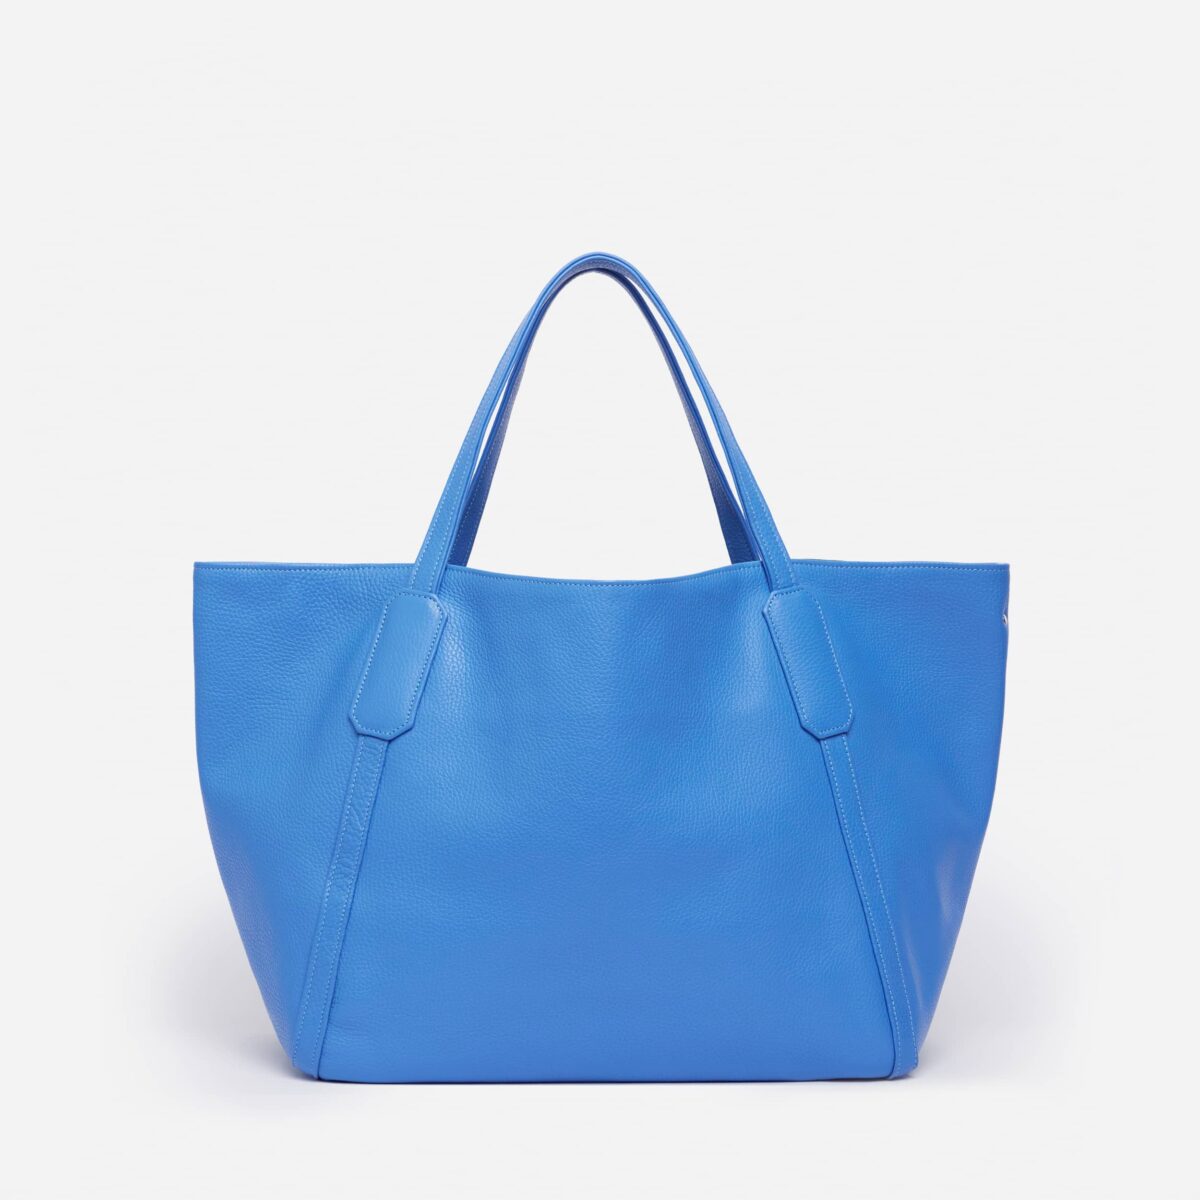 Limited Edition Tote Bags - SoWoit